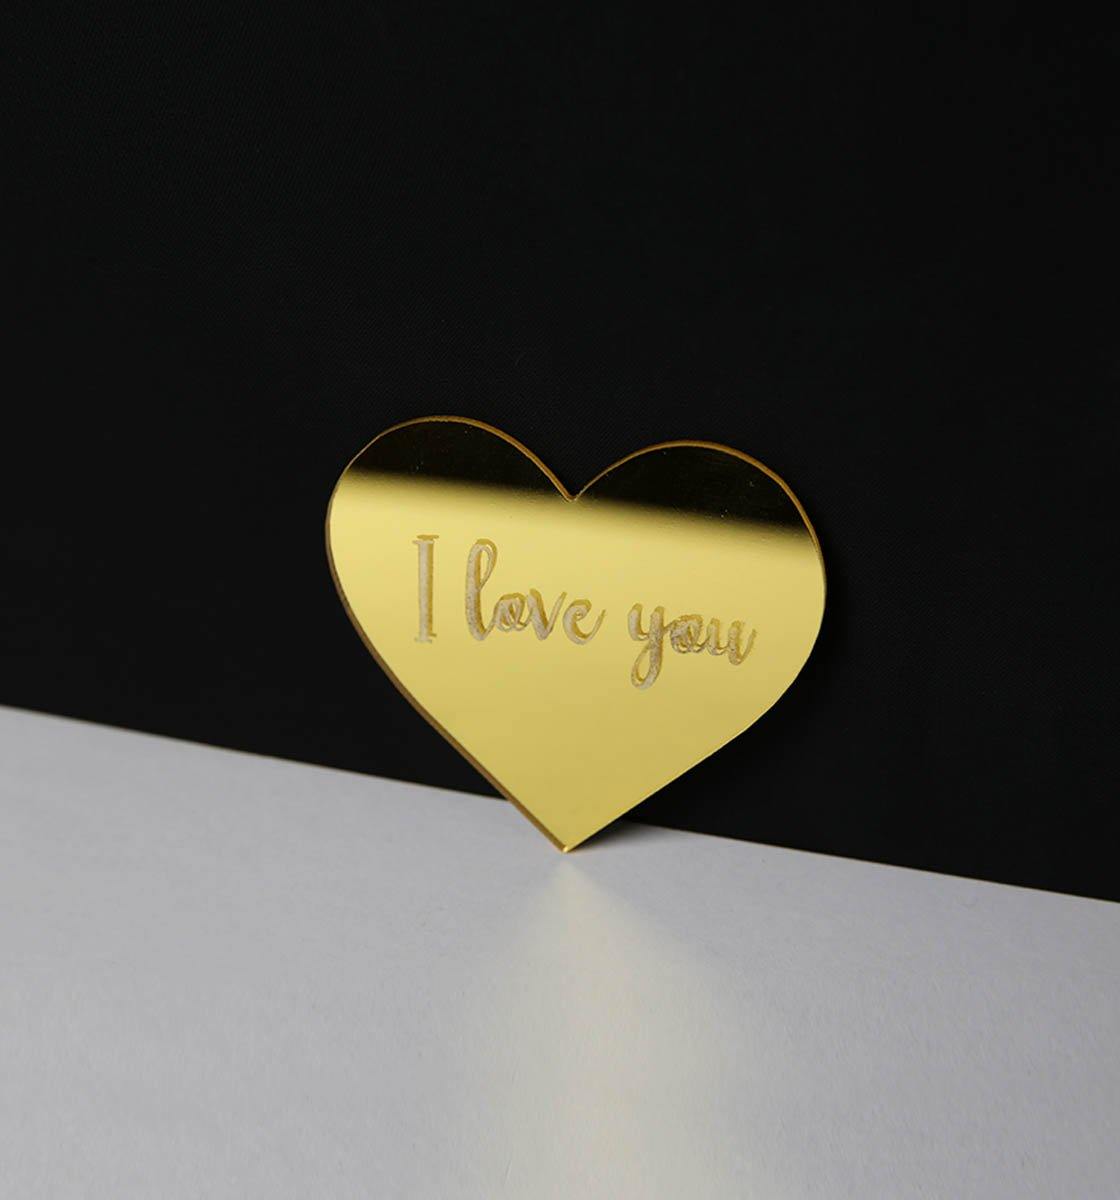 I Love You - Gold Charm - Inspired Baking 